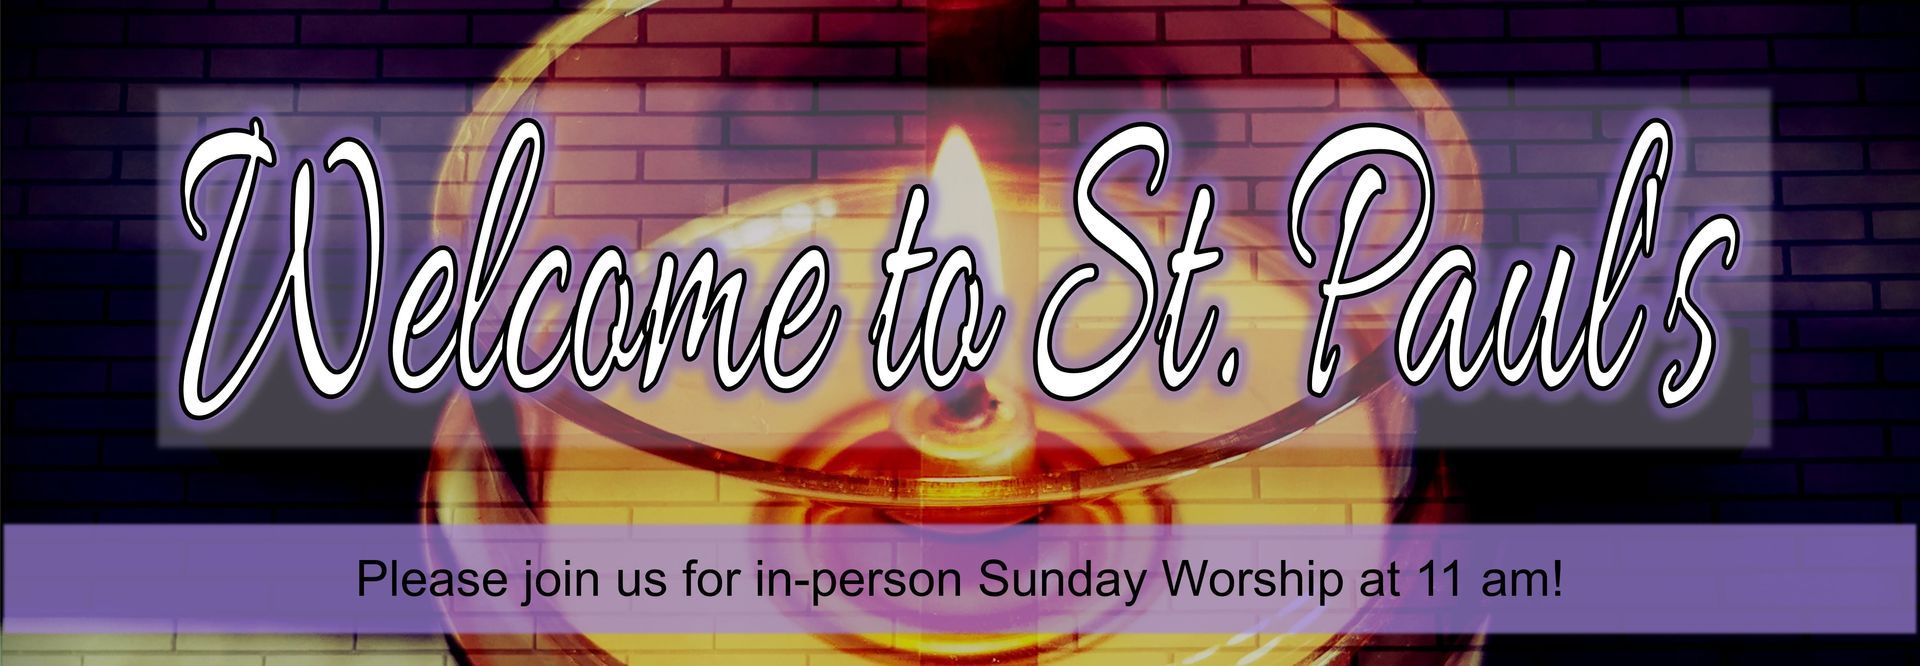 Graphic of text overlaying a small candle that reads “Welcome to St. Paul’s. Please join us for in-person Sunday Worship at 11 am!”